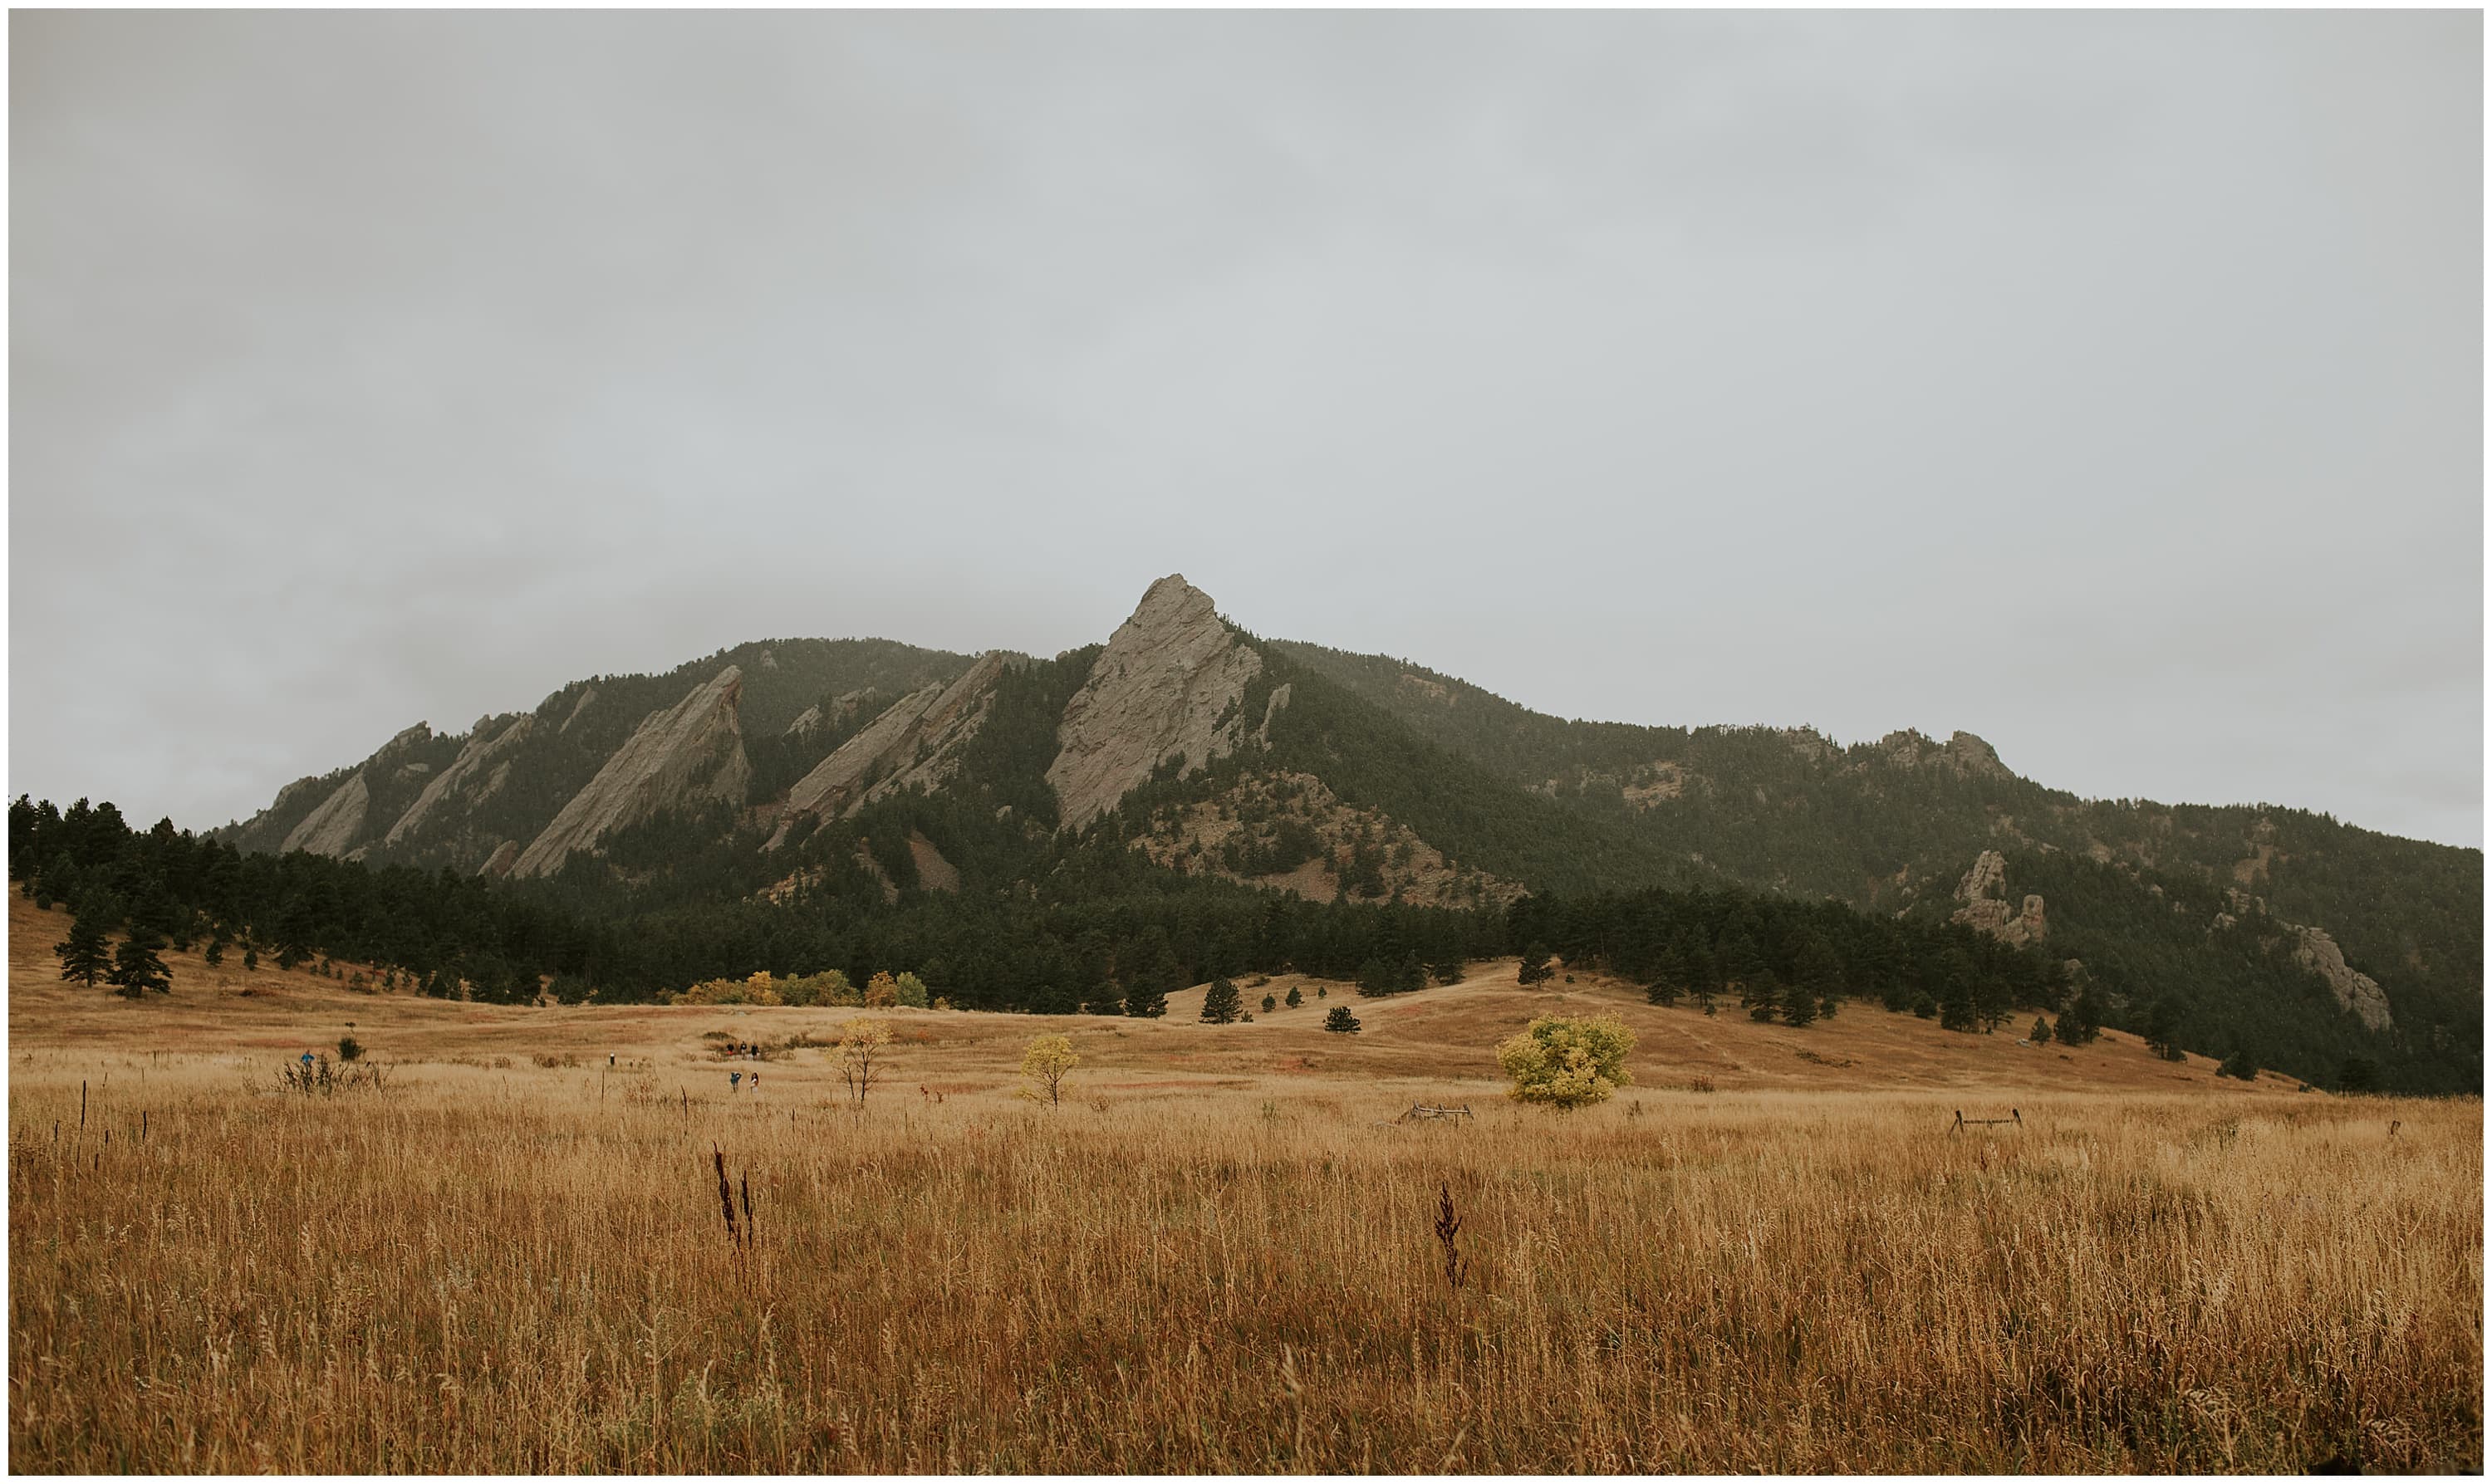 Boulder Flatirons Engagement Session with a puppy